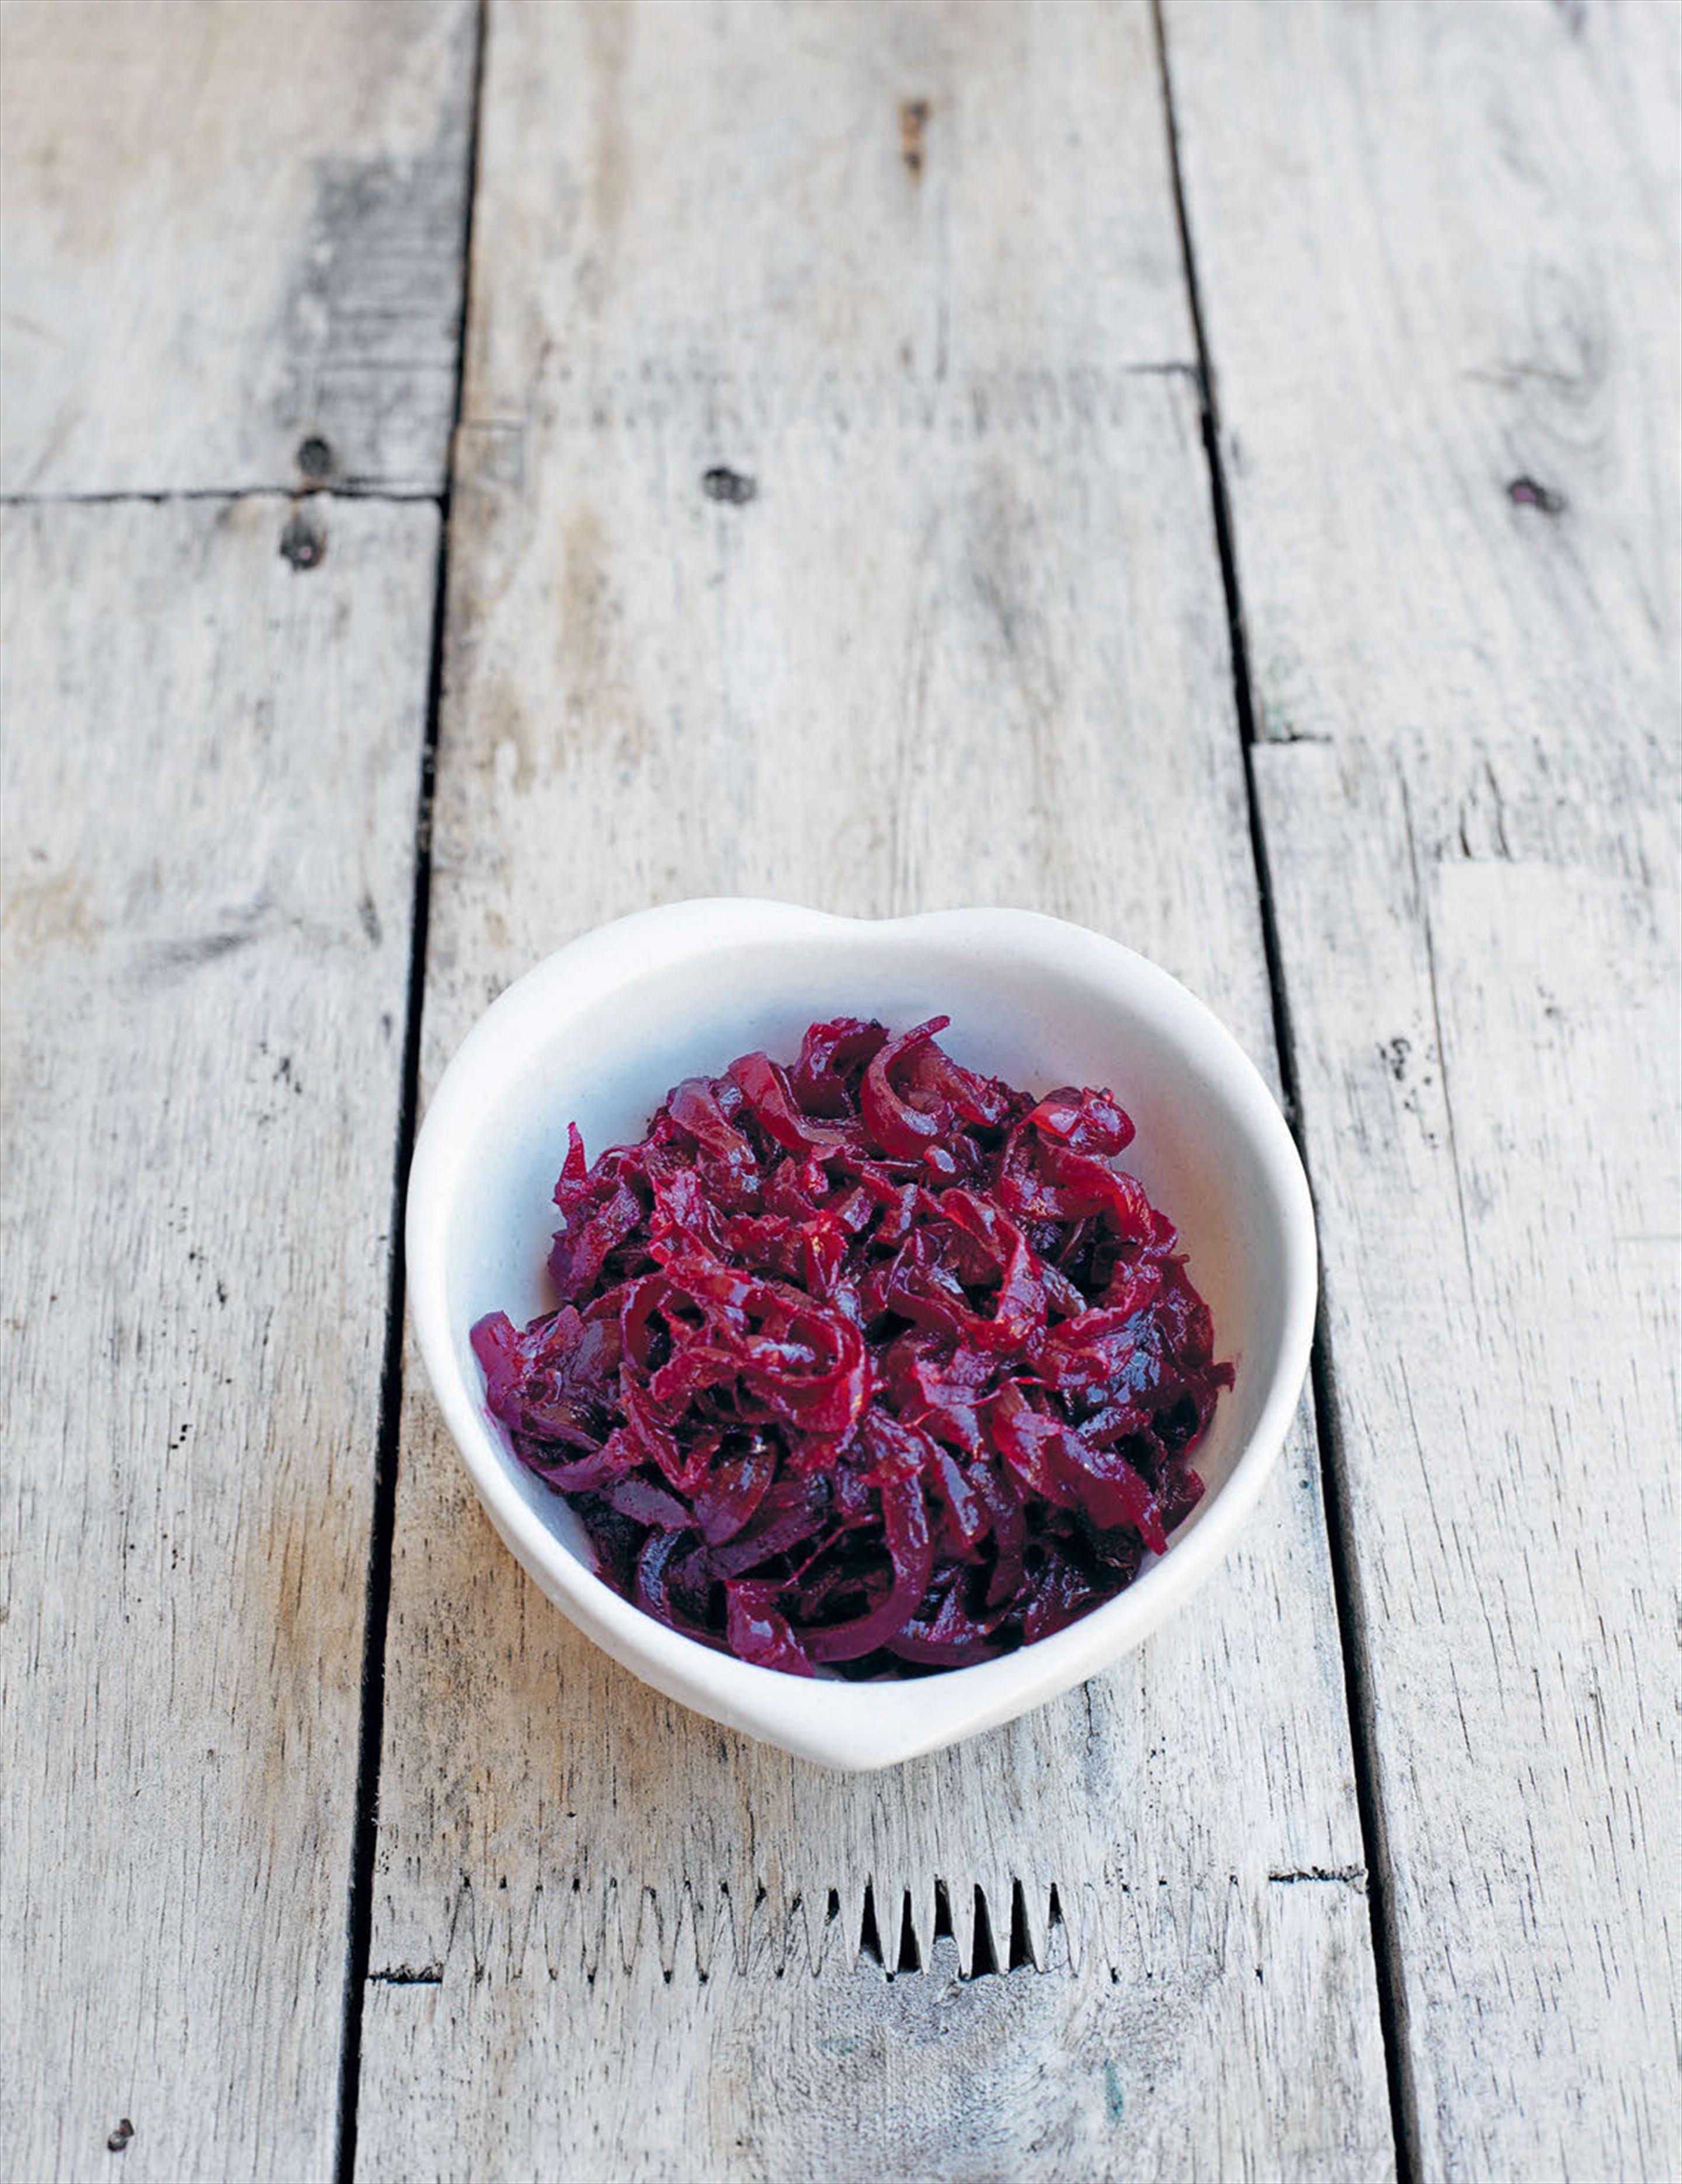 Onion and beetroot relish